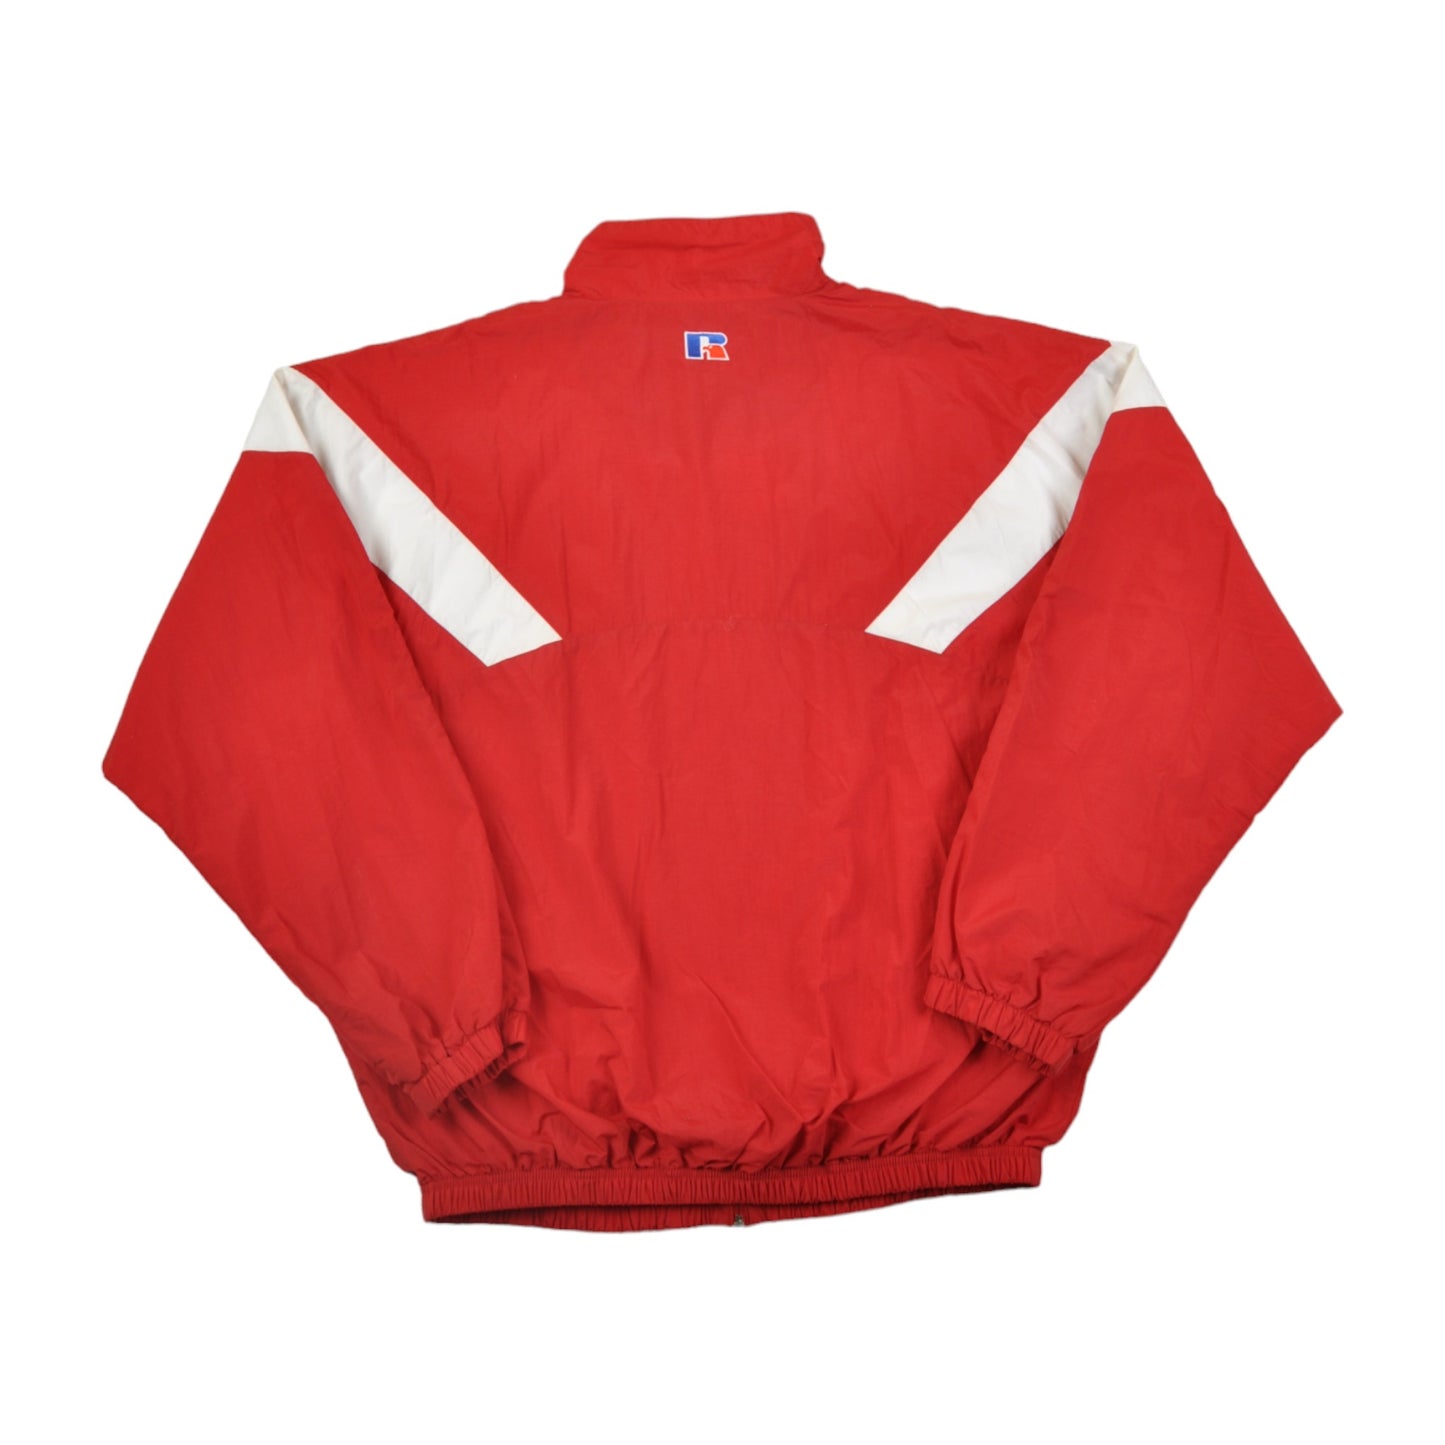 Vintage Russell Athletic Shell Suit Windbreaker Jacket Red/White XXL